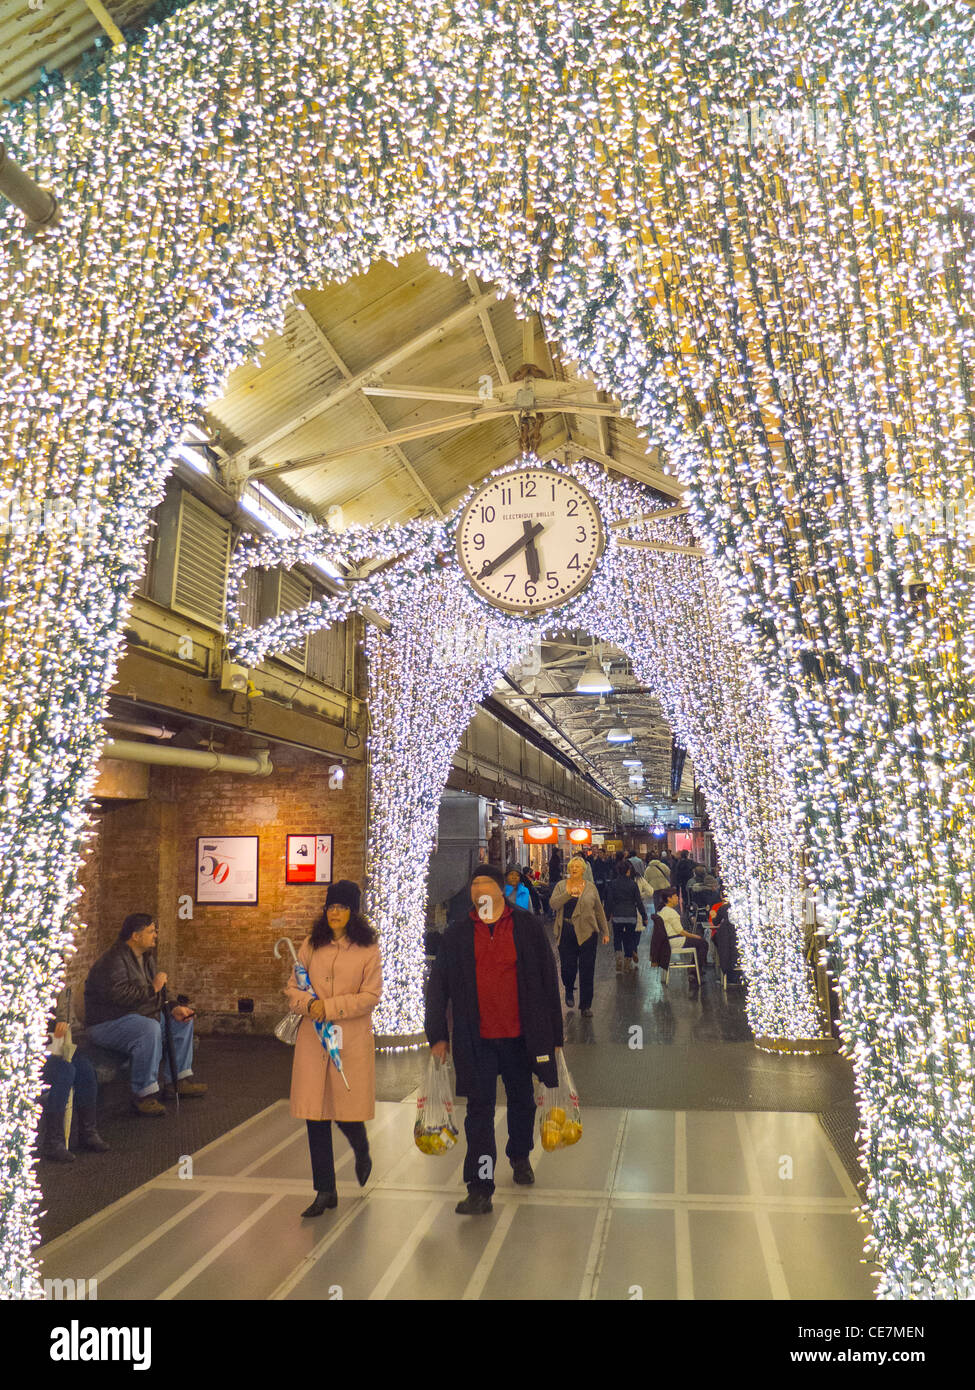 Christmas Shopping at Chelsea Market – The Admissions Blog